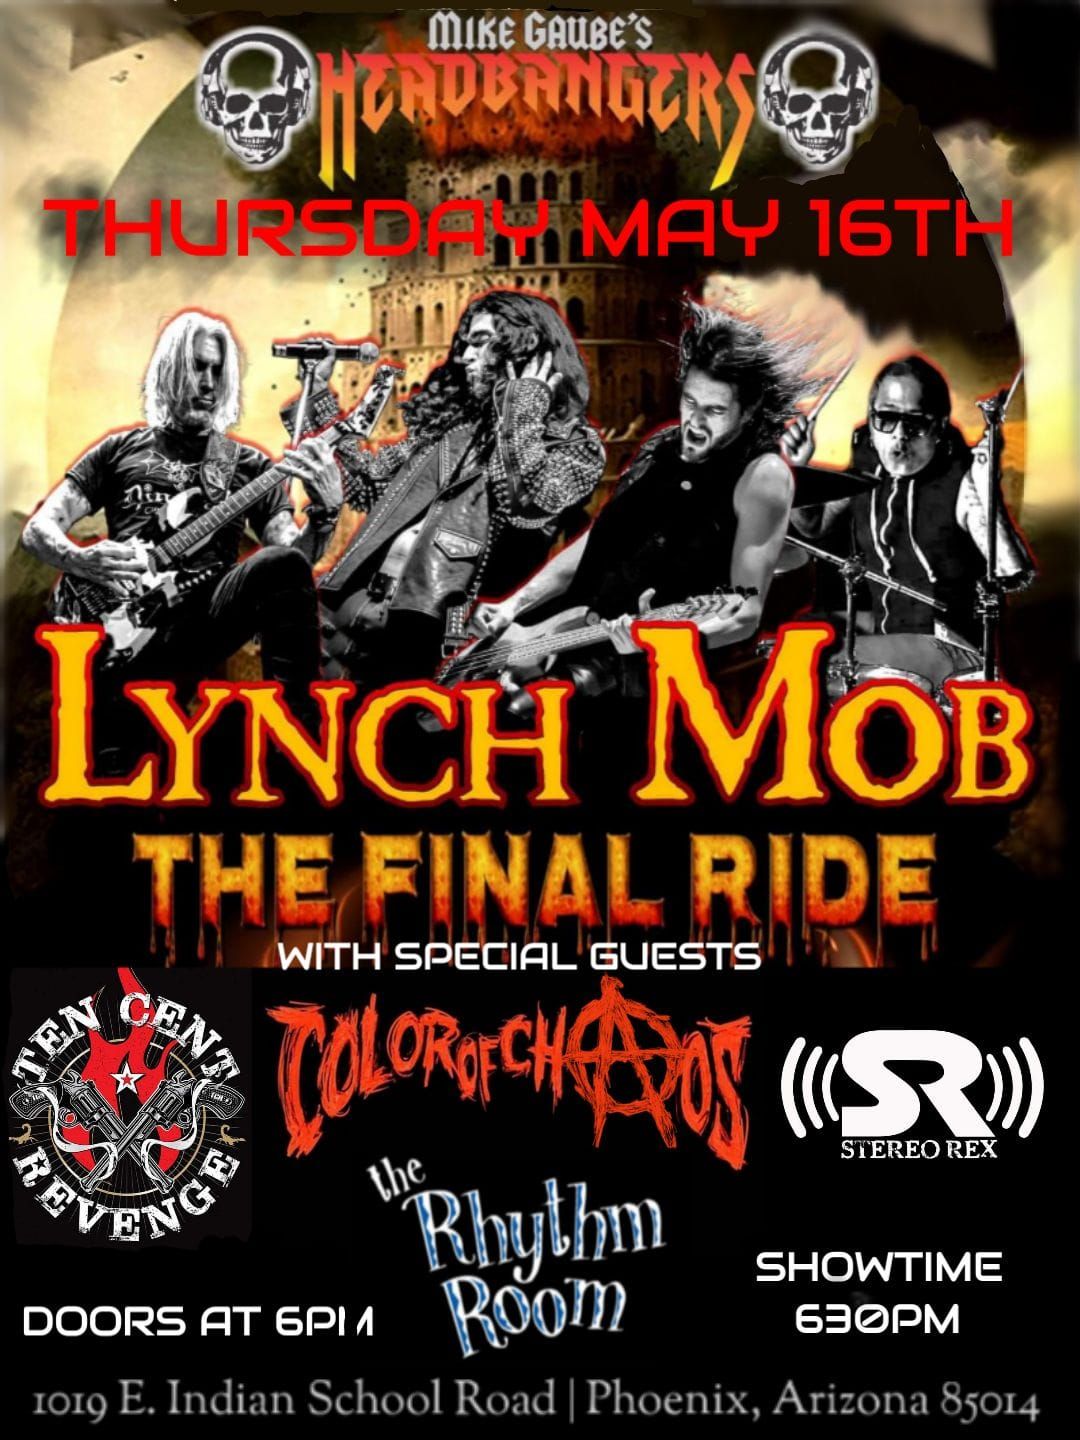 LYNCH MOB-The Final Ride w\/MIKE GAUBE'S HEADBANGERS, STEREO REX, COLOR OF CHAOS and TEN CENT REVENGE